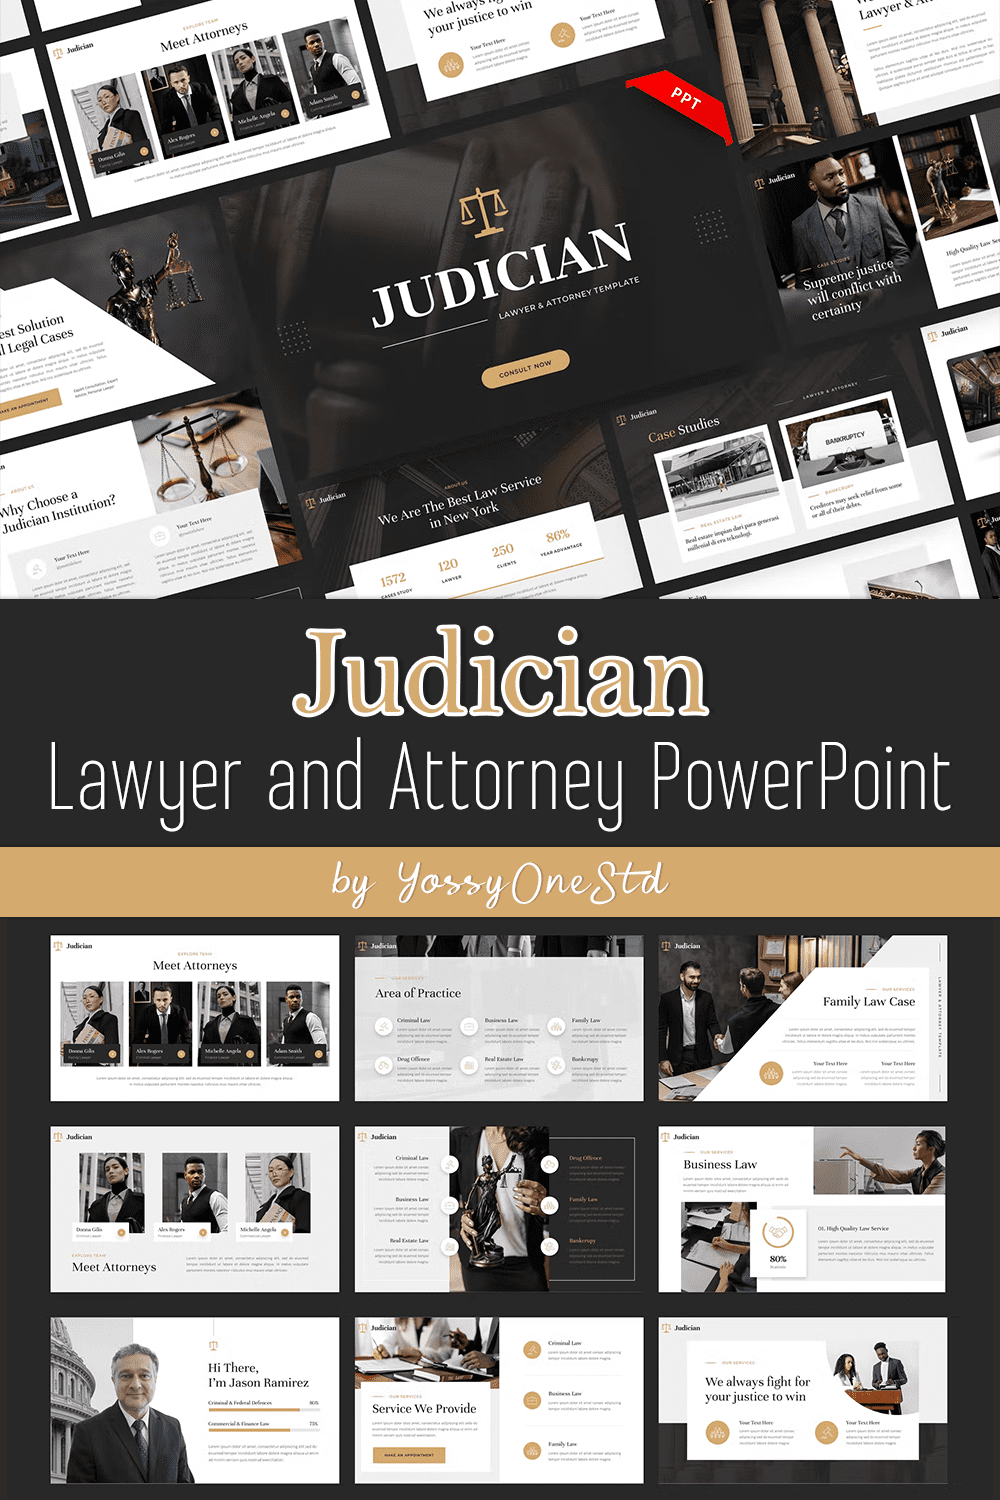 Judician lawyer and attorney powerpoint of pinterest.